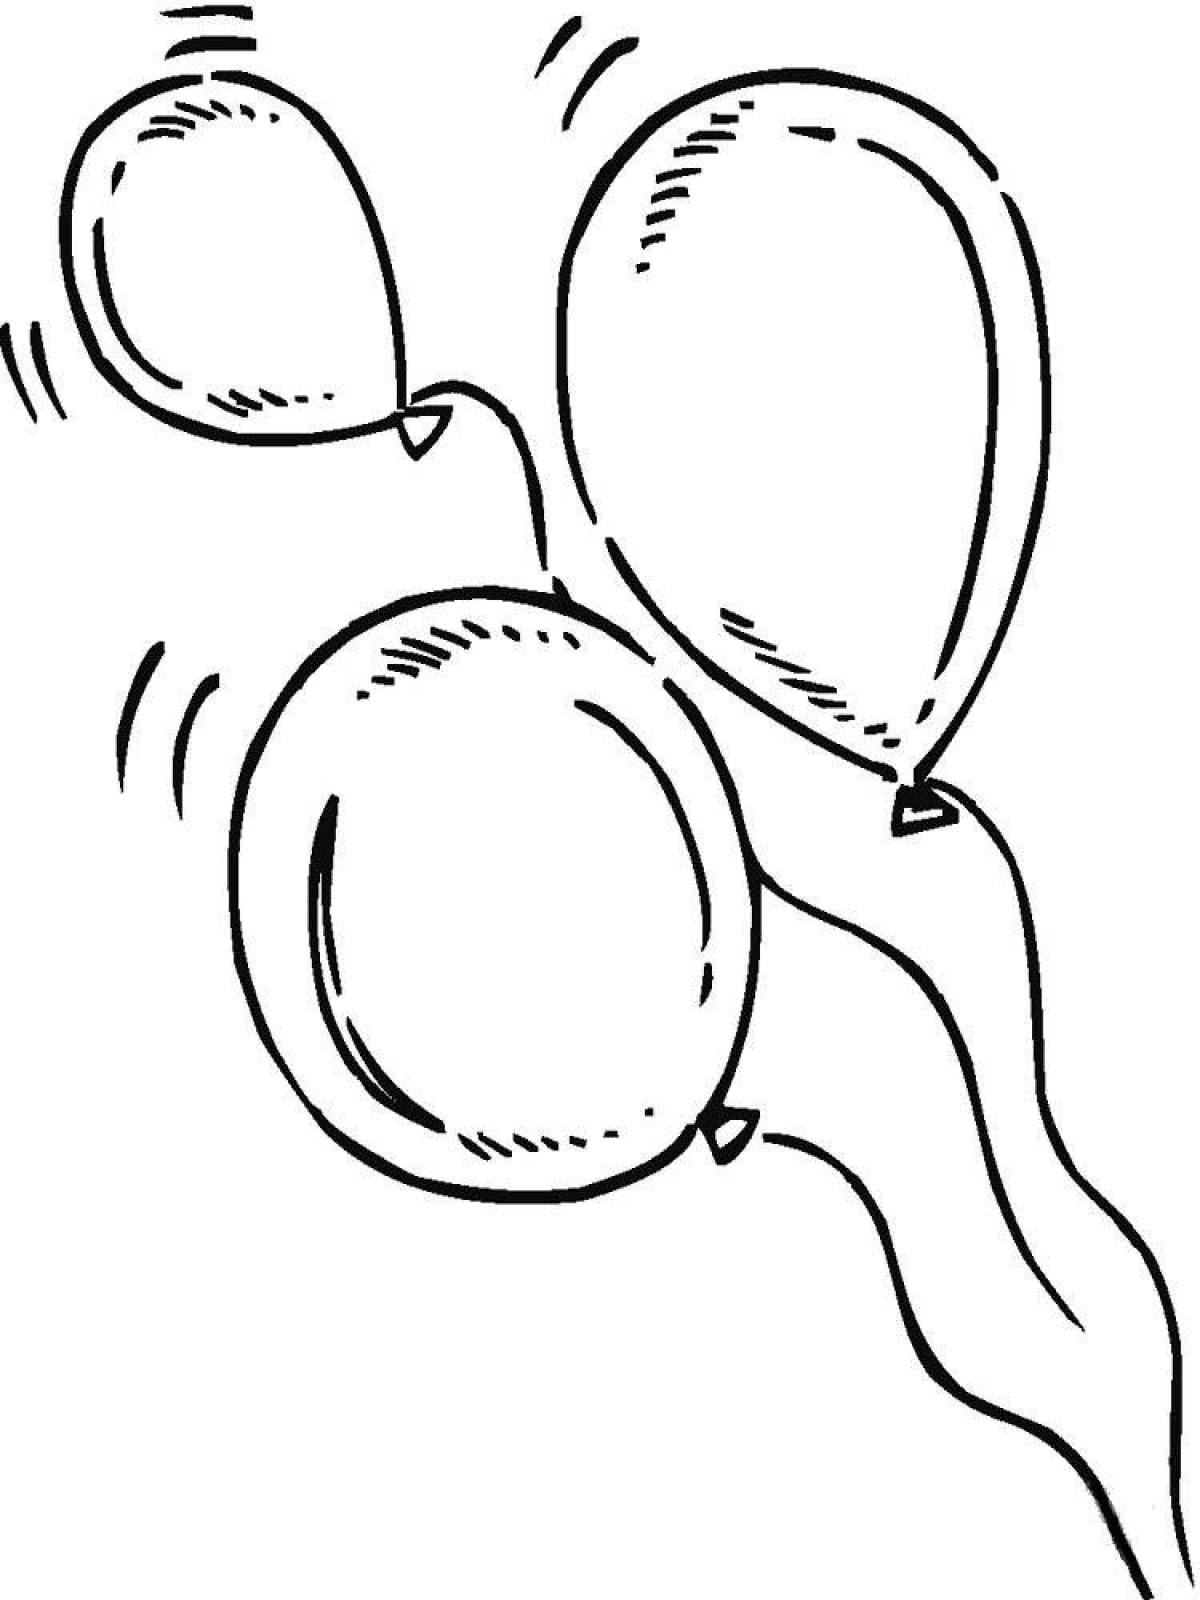 Colored luminous balloons coloring page